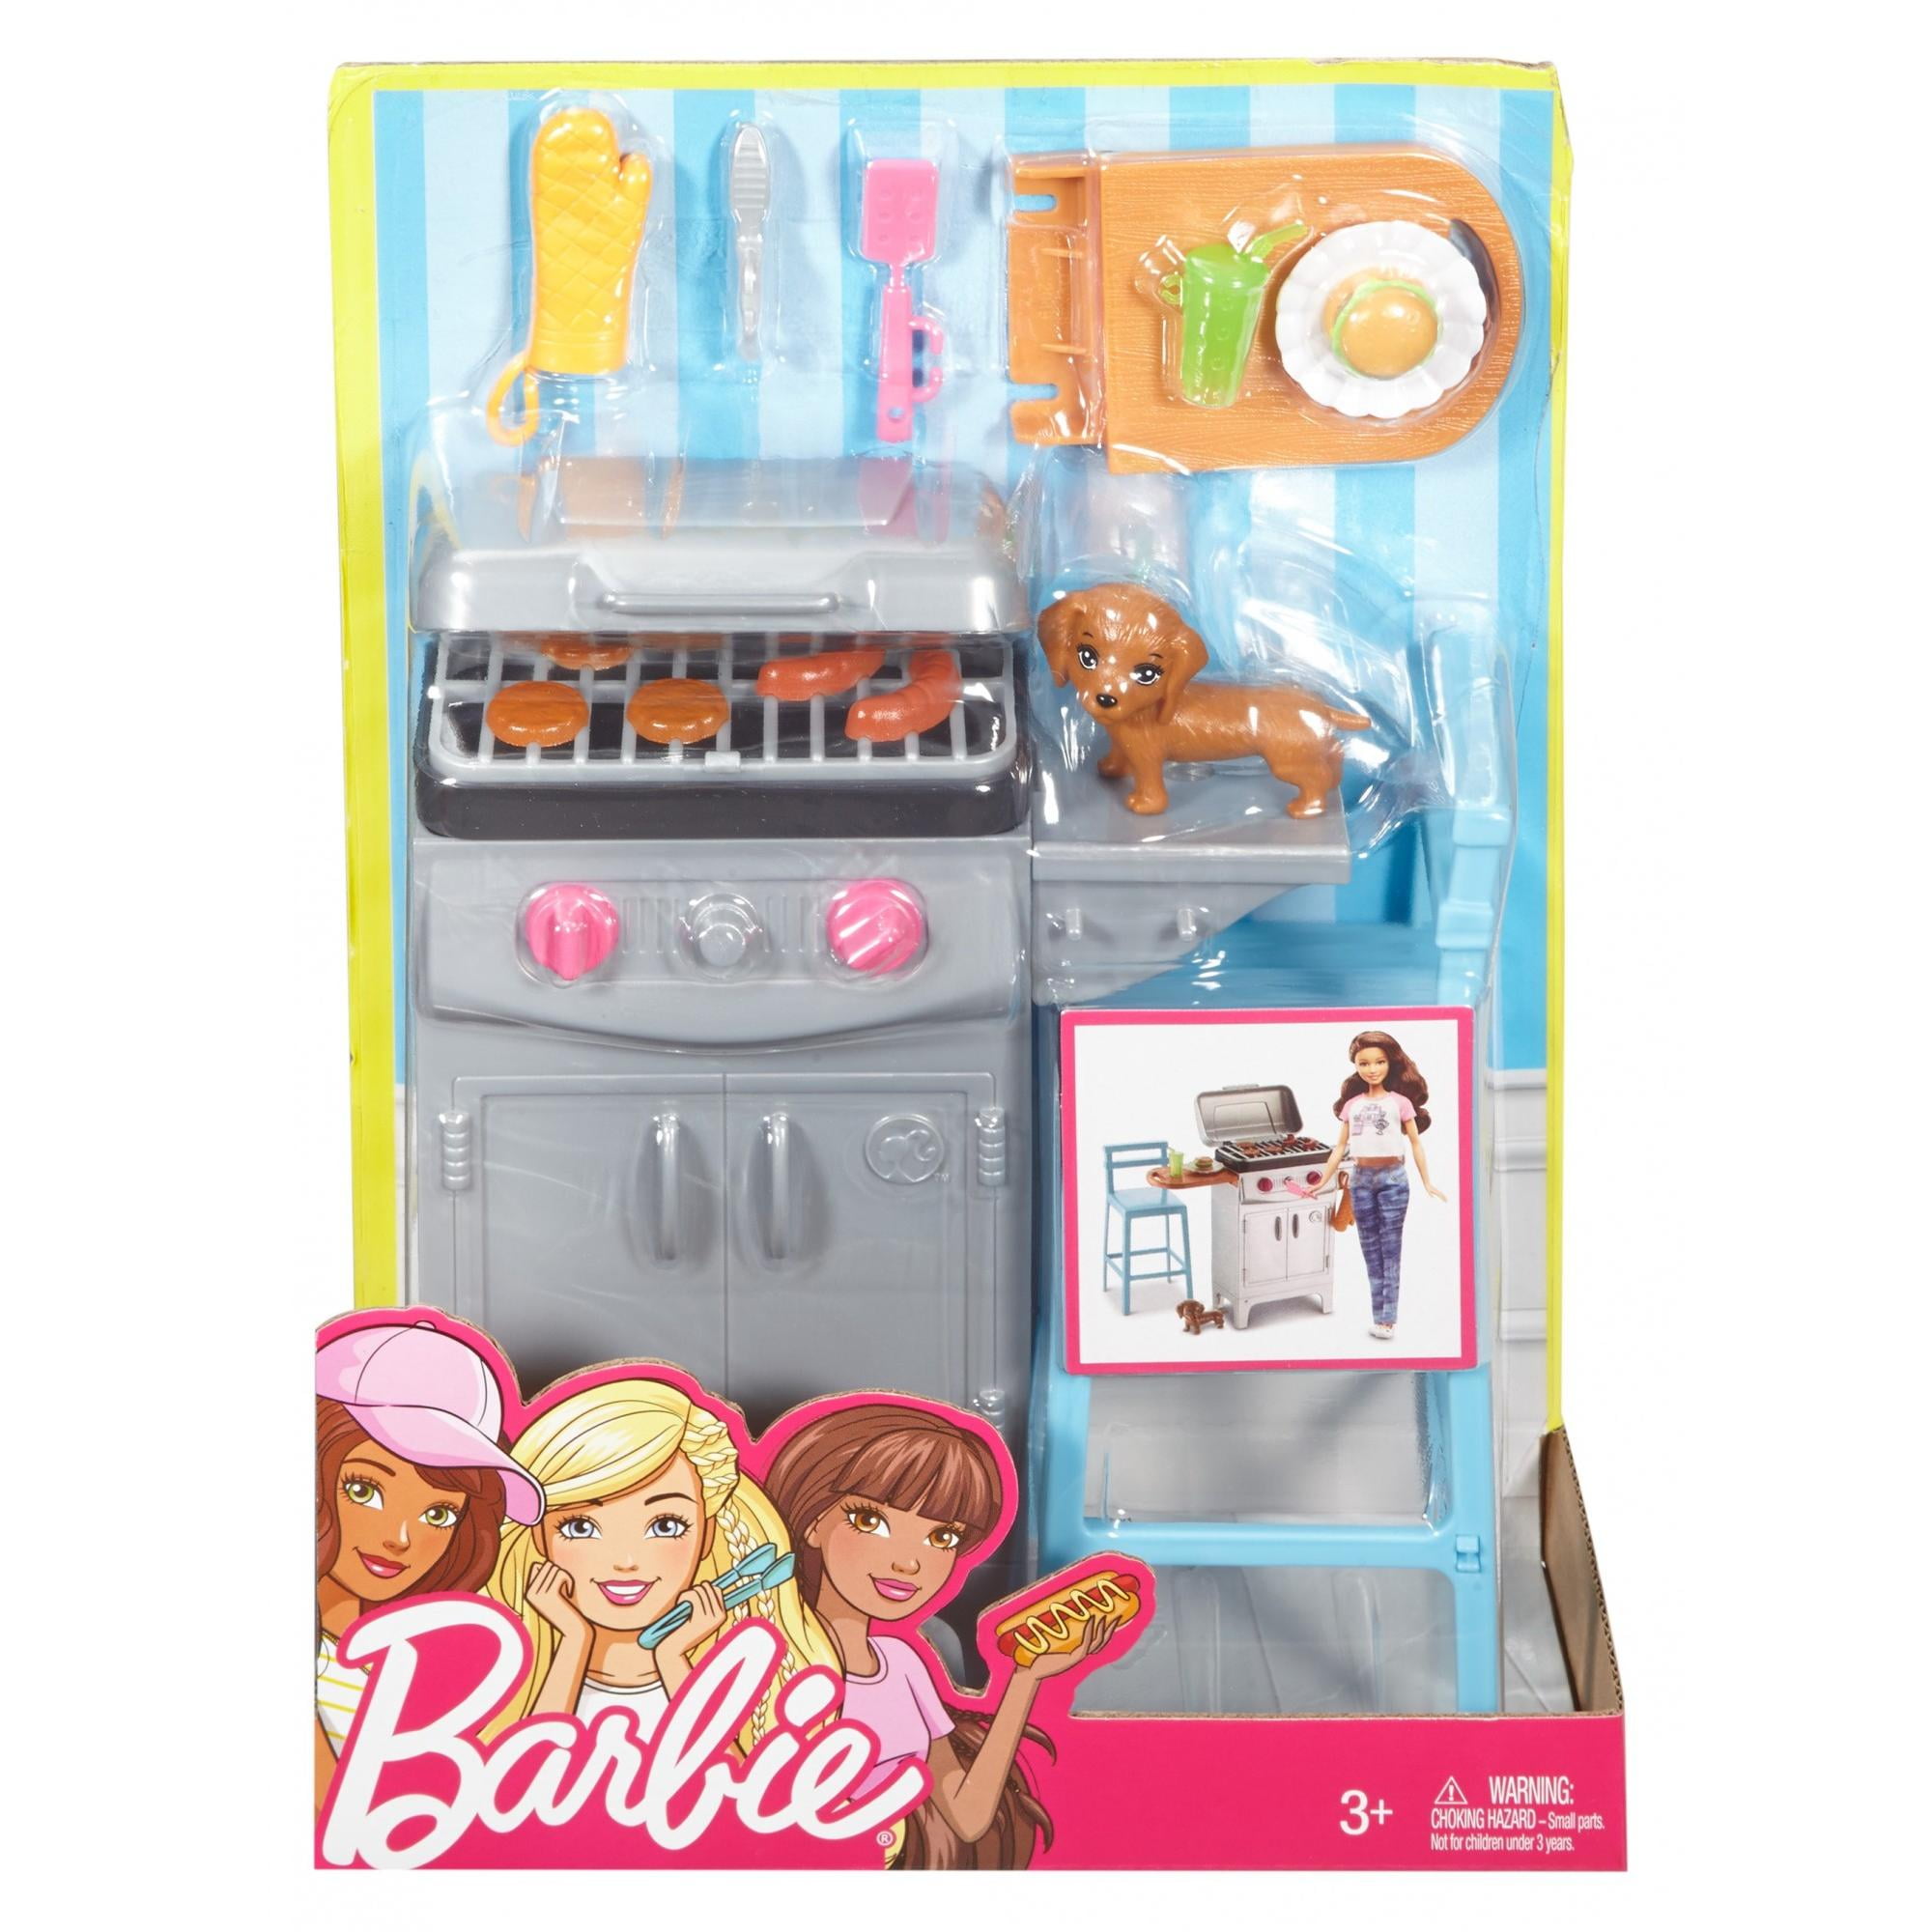 barbie barbecue playset